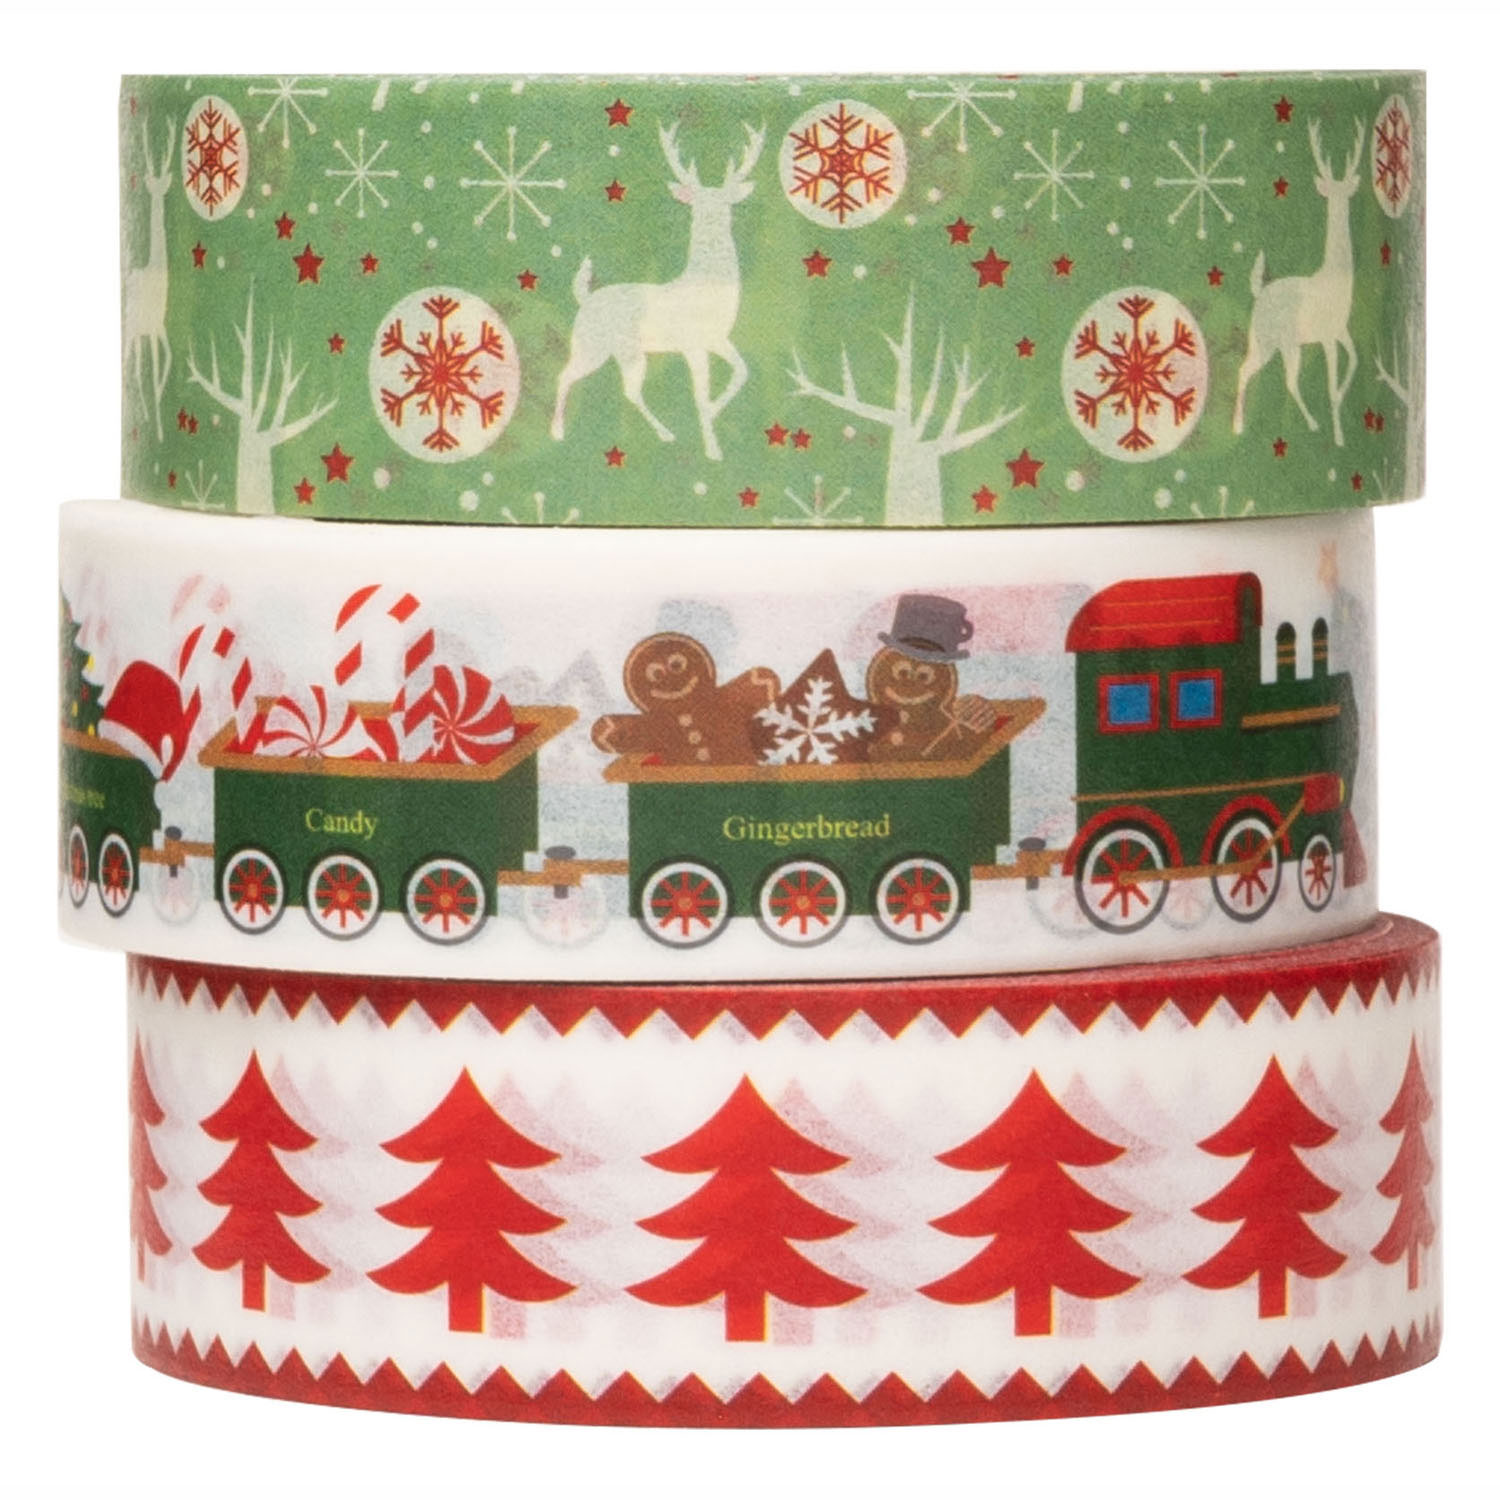 Colorations Washi Tape Kerst 3 Rollen, 5mtr.